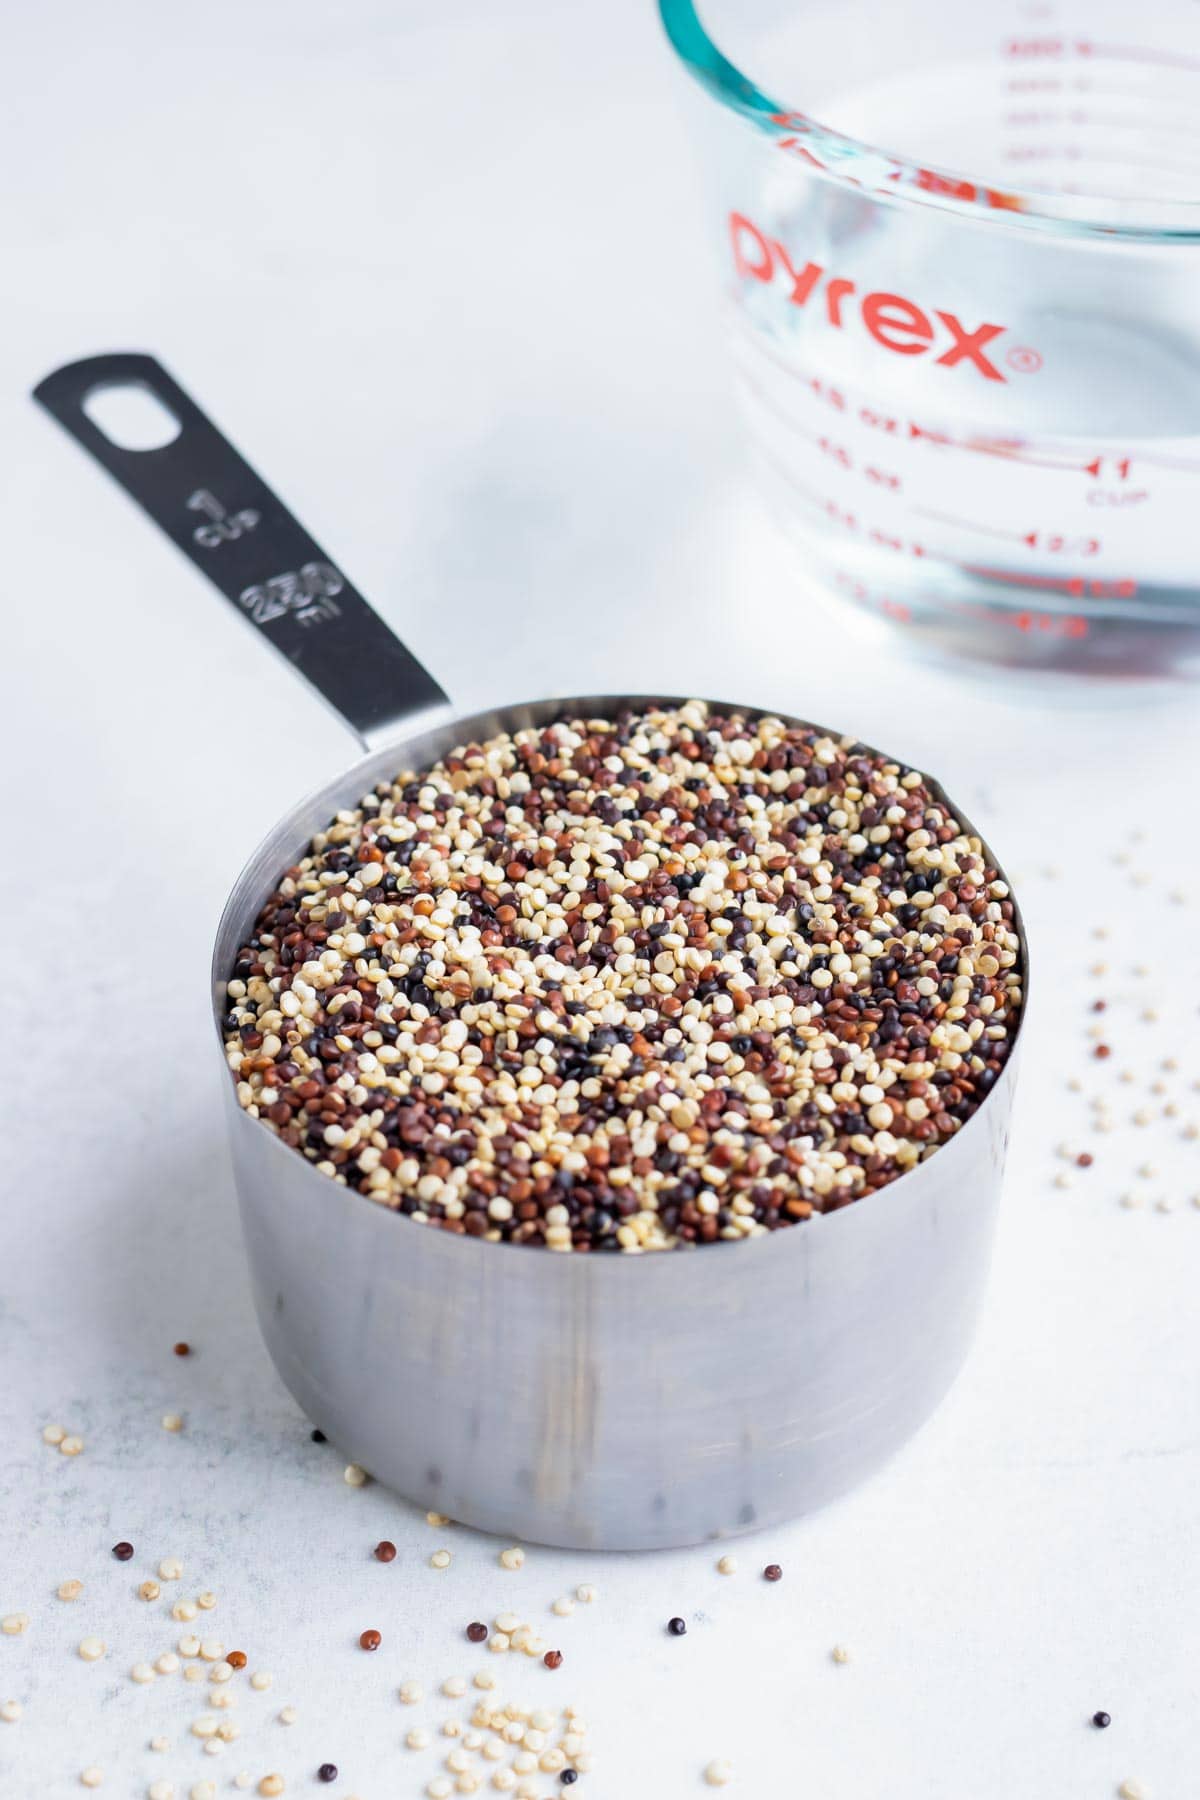 A 1 cup measuring cup that is full of red, white, and black dry quinoa to show the ratio with water.